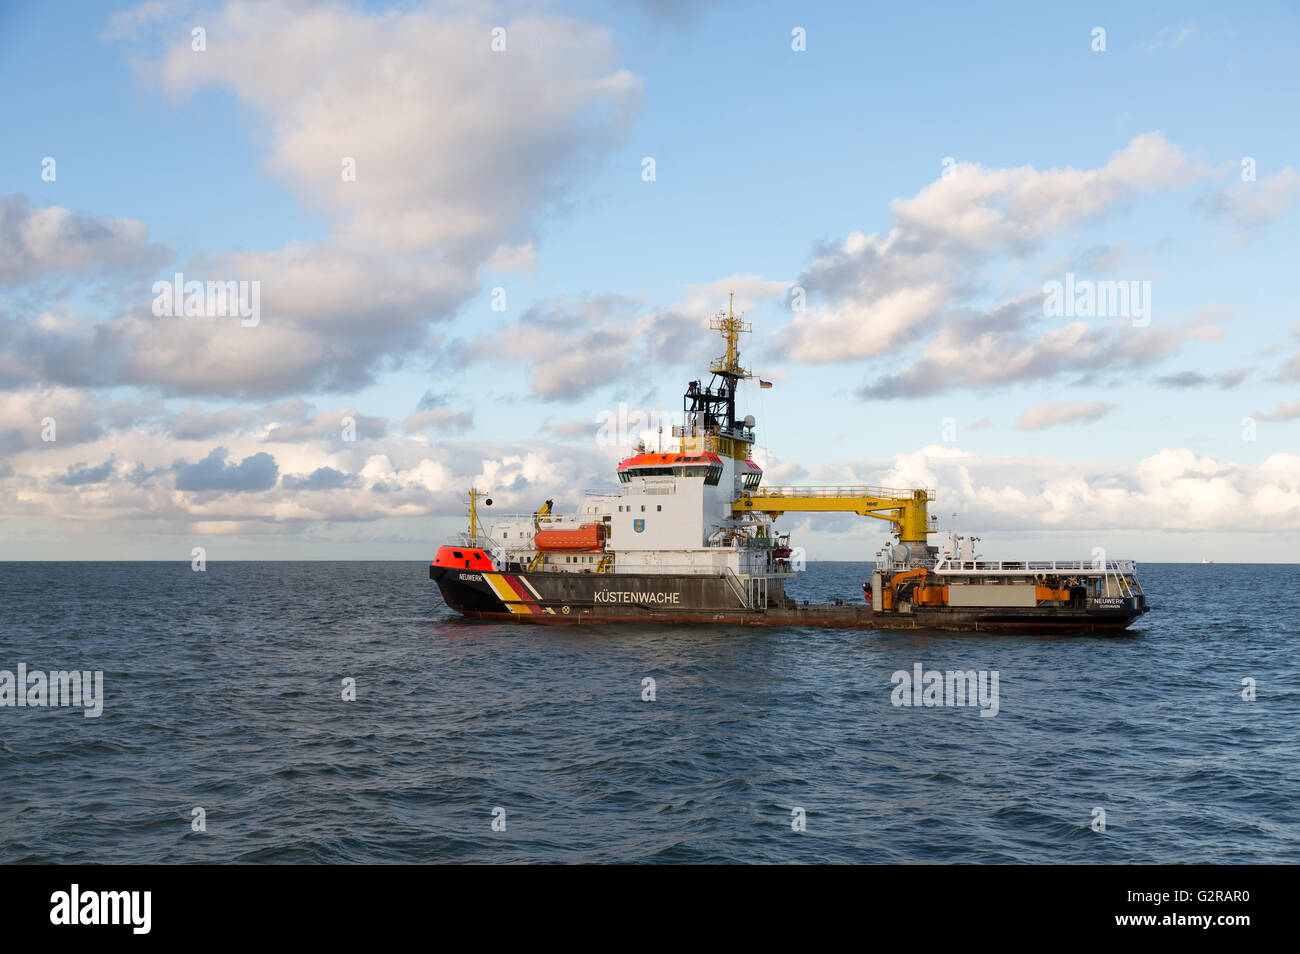 20.09.2015, Neuwerk, Hamburg, Germany - Ship of Coastguard at the island Neuwerk in the German Bight. / Ship of the German coast guard by the Iceland Neuwerk in the German Bay. 00A150920D312CAROEX.JPG - NOT for SALE in G E R M A N Y, A U S T R I A, S W I T Z E R L A N D [MODEL RELEASE: NOT APPLICABLE, PROPERTY RELEASE: NO, (c) caro photo agency / Bastian, http://www.caro-images.com, info@carofoto.pl - Any use of this picture is subject to royalty!] Stock Photo